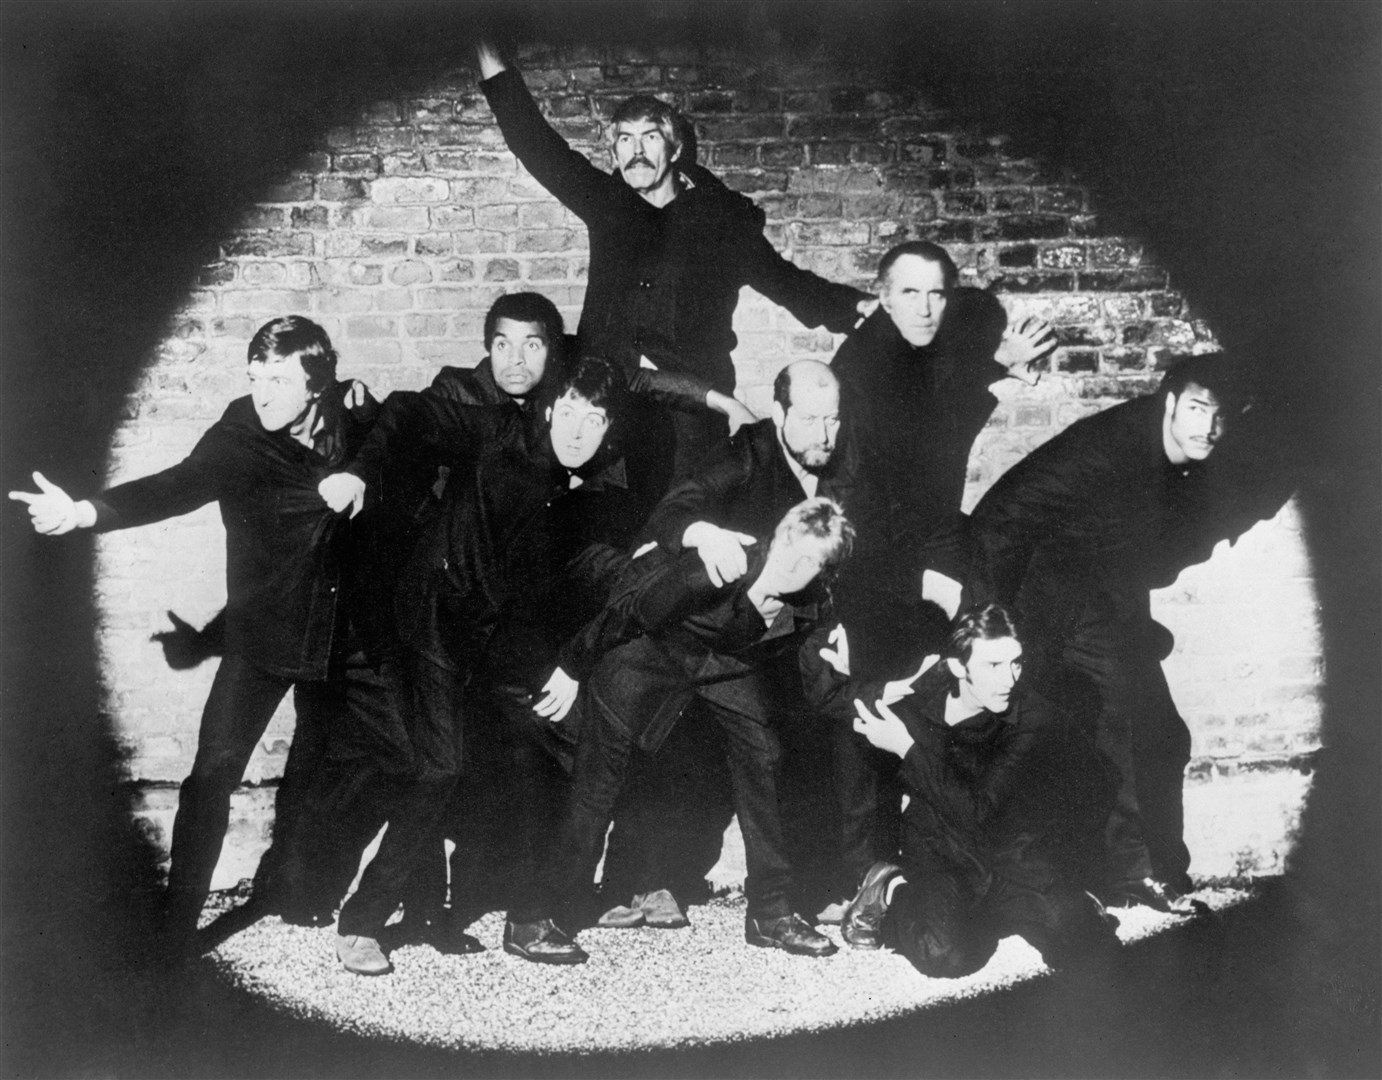 From left, BBC personality Michael Parkinson, singer Kenny Lynch, actor James Coburn (behind), Paul McCartney (below), MP Clement Freud, Linda McCartney, actor Christopher Lee, singer-songwriter Denny Laine (below) and boxer John Conteh. (Clive Arrowsmith/PA)